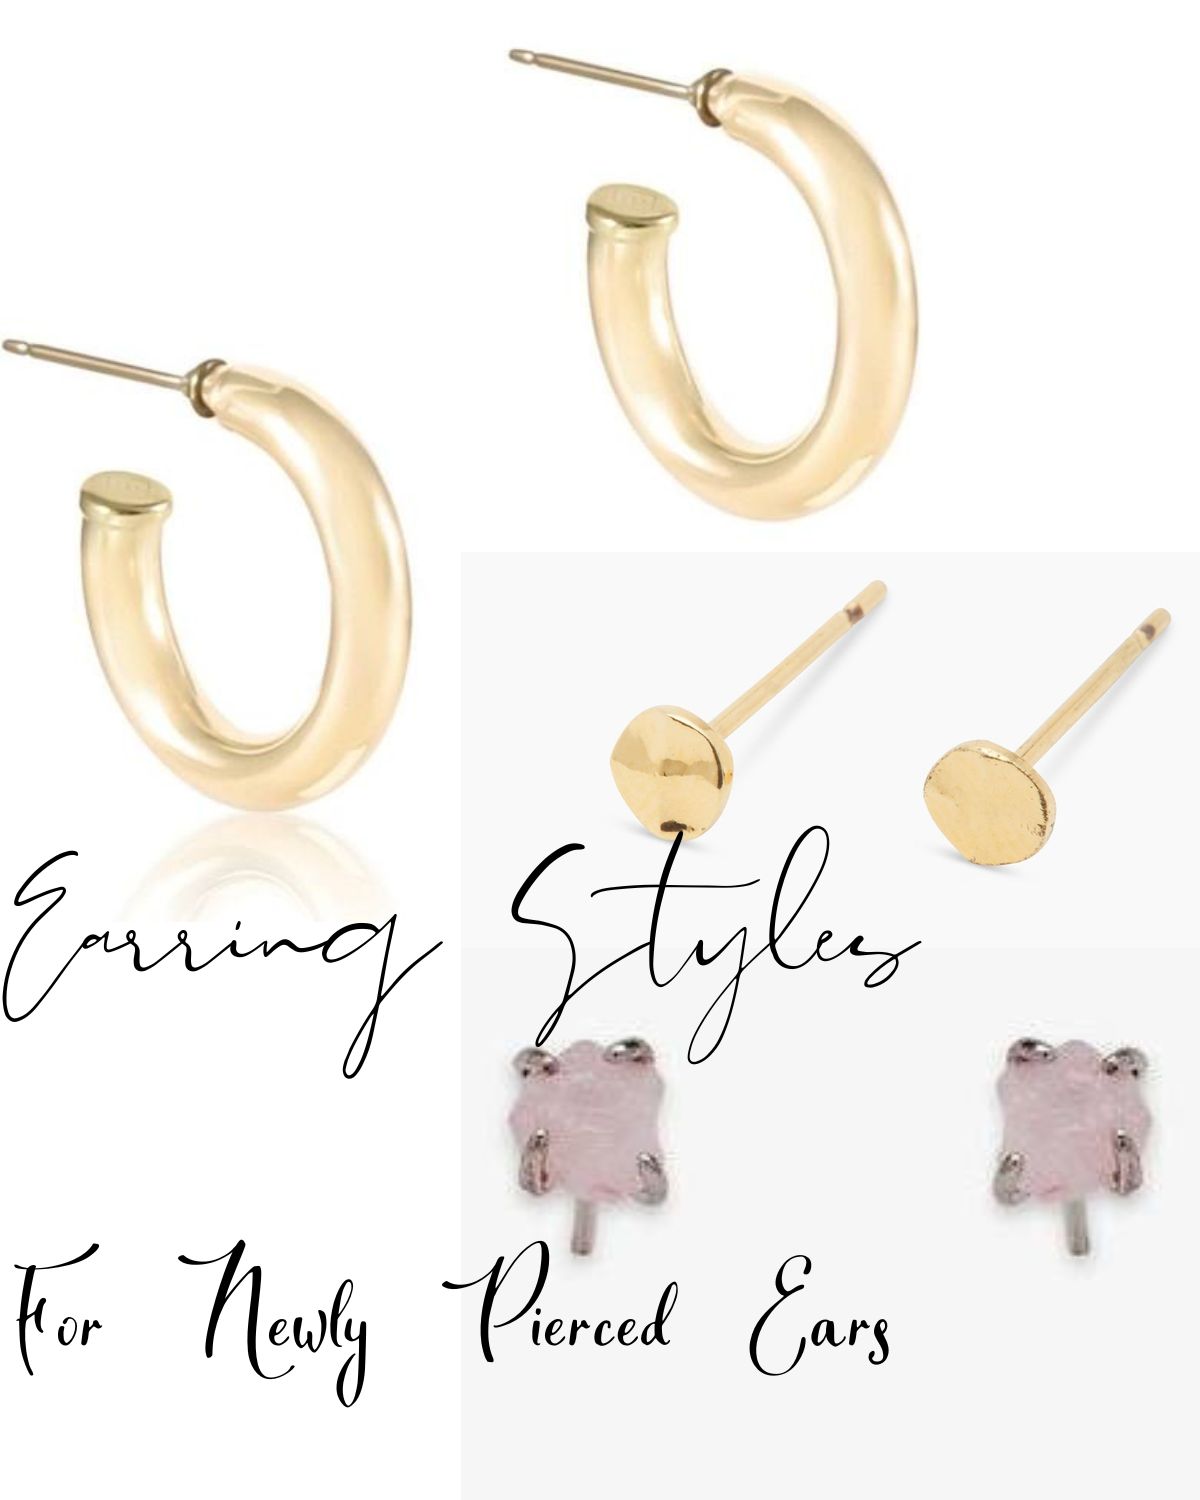 Three pairs of earrings, one pair of hoops and two studs